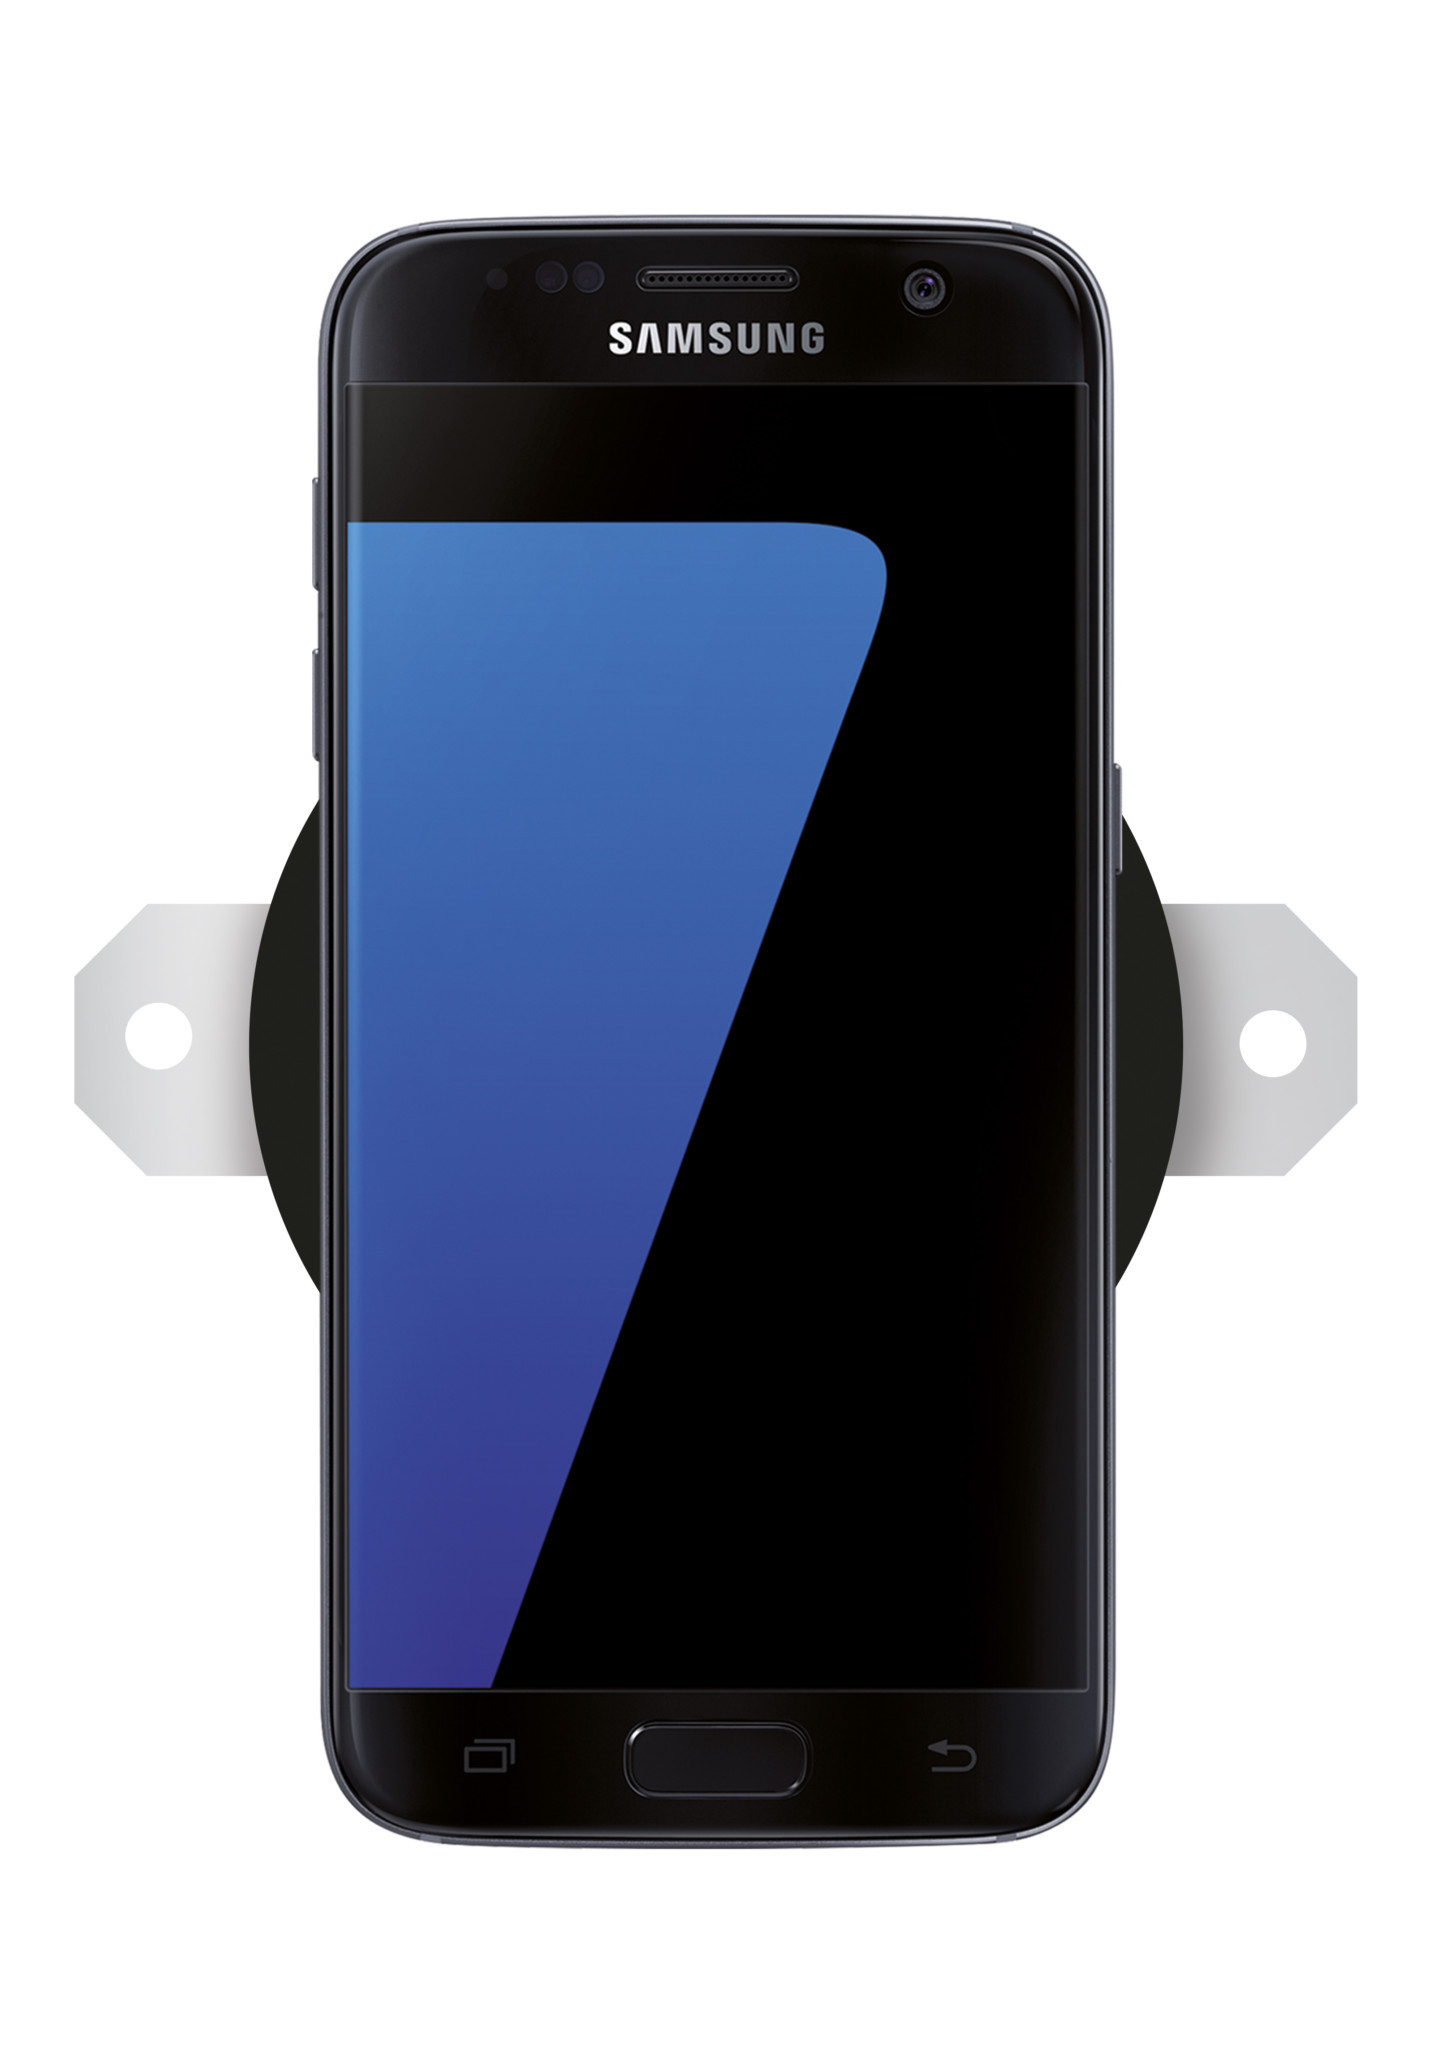 Samsung Galaxy S7 on a Zens Built-in Wireless Charger Round Black